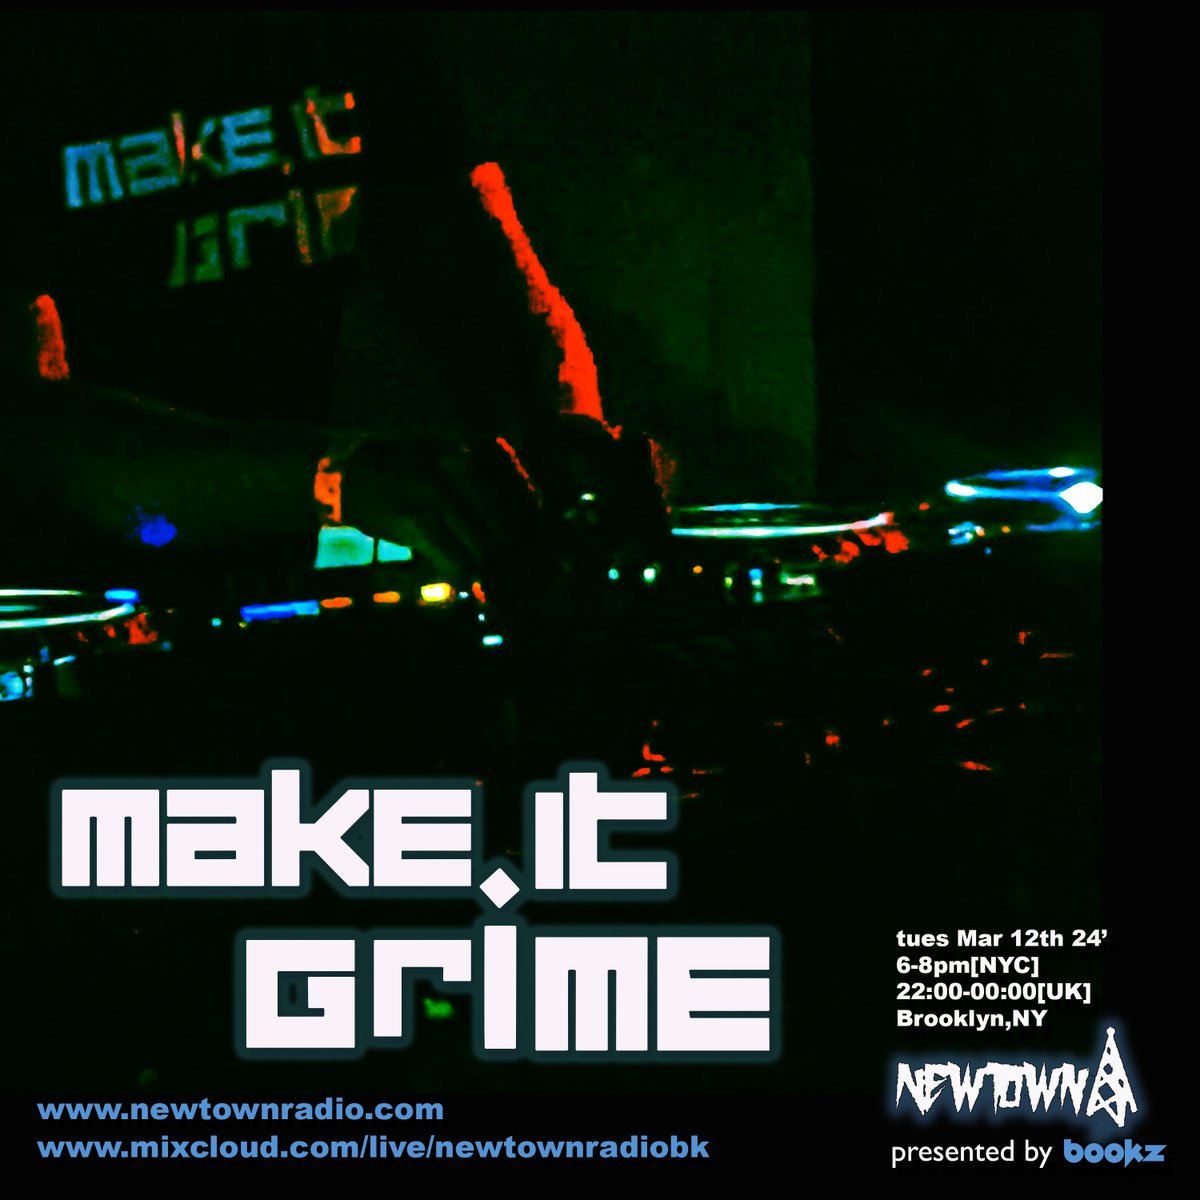 time for another #MakeItGrime tomorrow 

2hrs of Grime, 140Bass 140Hybrid...
drive is stacked 
😤🔊🔥🔊🔥⛽⛽⛽

#GrimeMusic #slimzosgang #140bass #140Hybrid #internationalgrime #darkgrime #americangrime #nycgrime